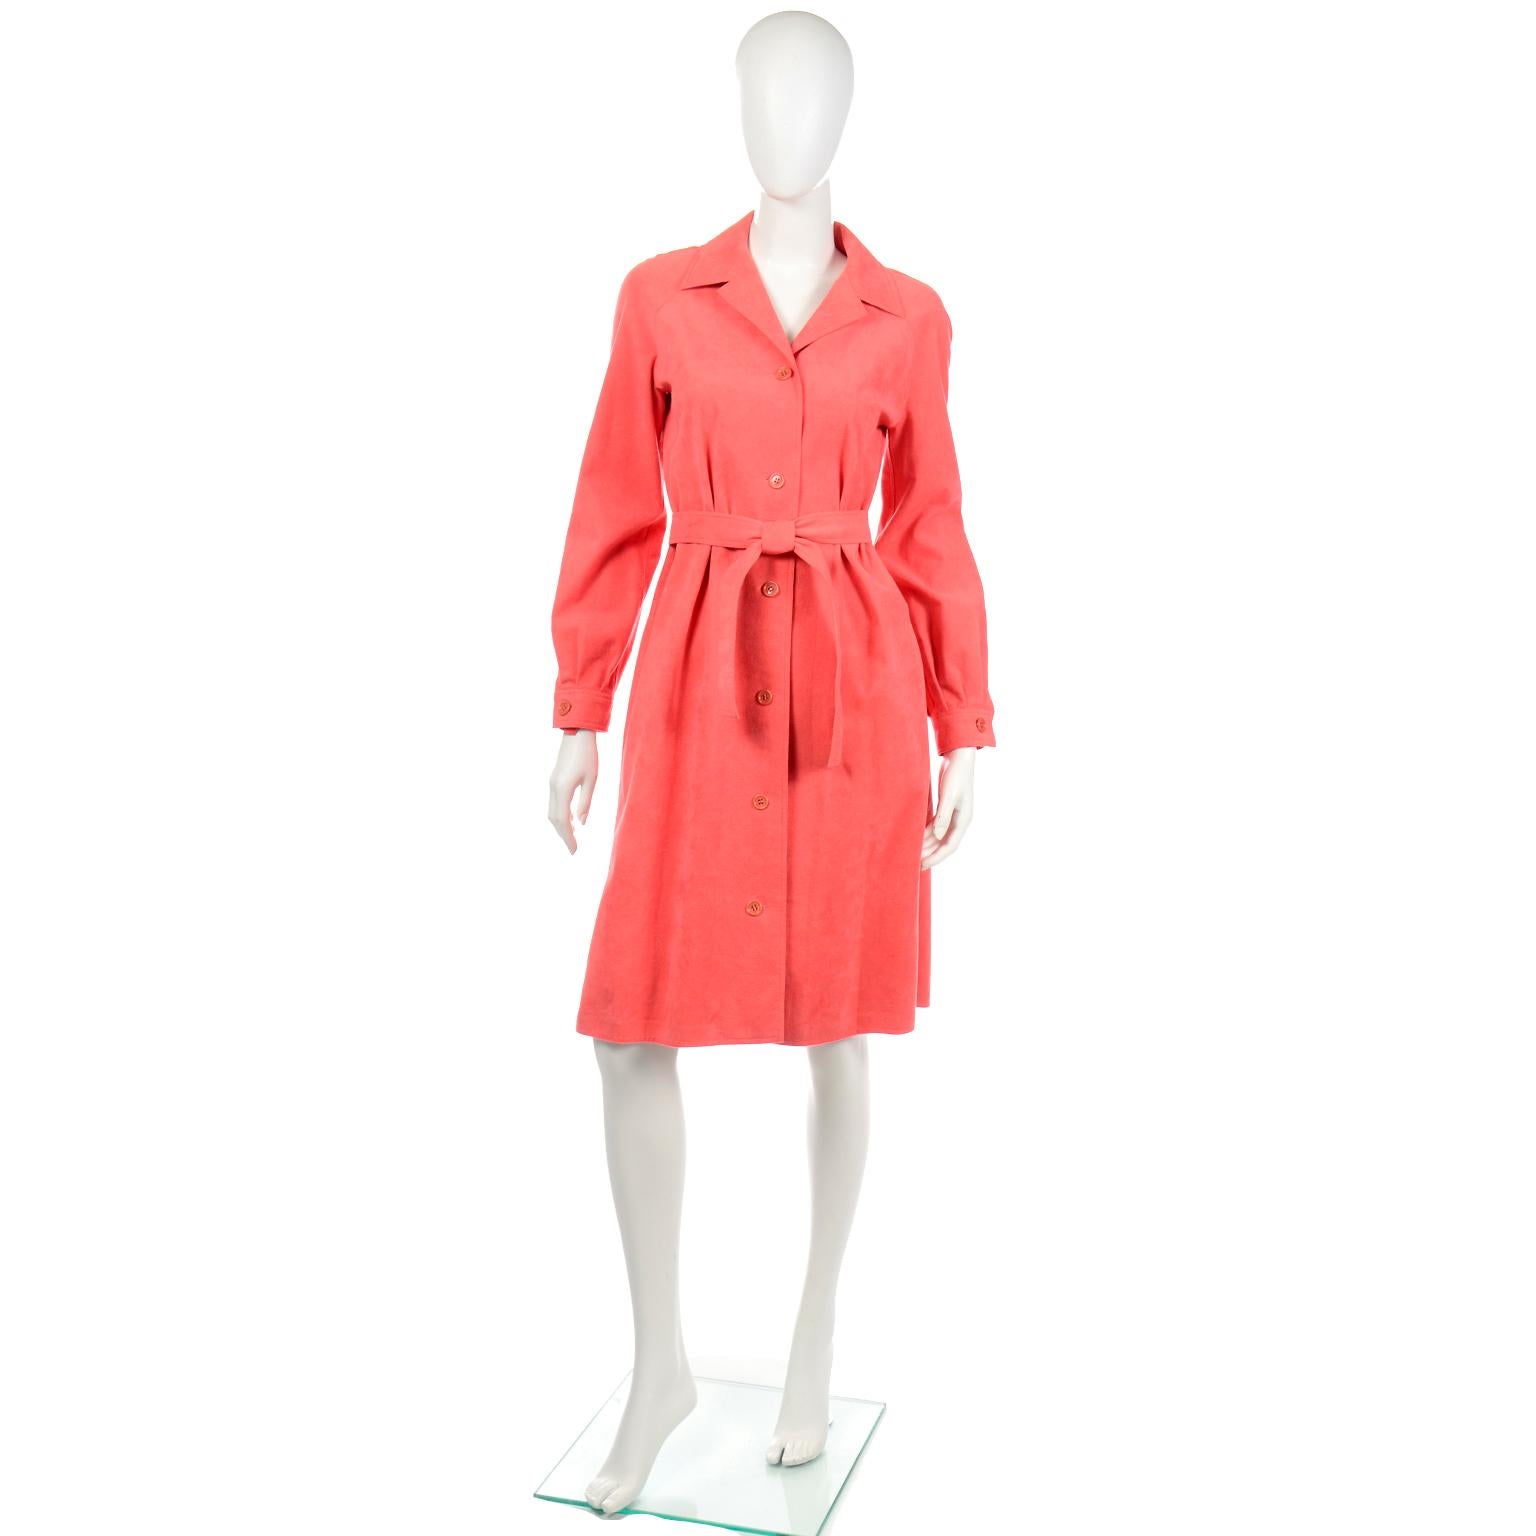 This is an original vintage 1970's Halston ultrasuede dress/coat in a beautiful salmon peach color. The dress/coat has a belt that is attached at the waist, functional pockets, a notched collar and front button opening. The cuffs of the sleeves have